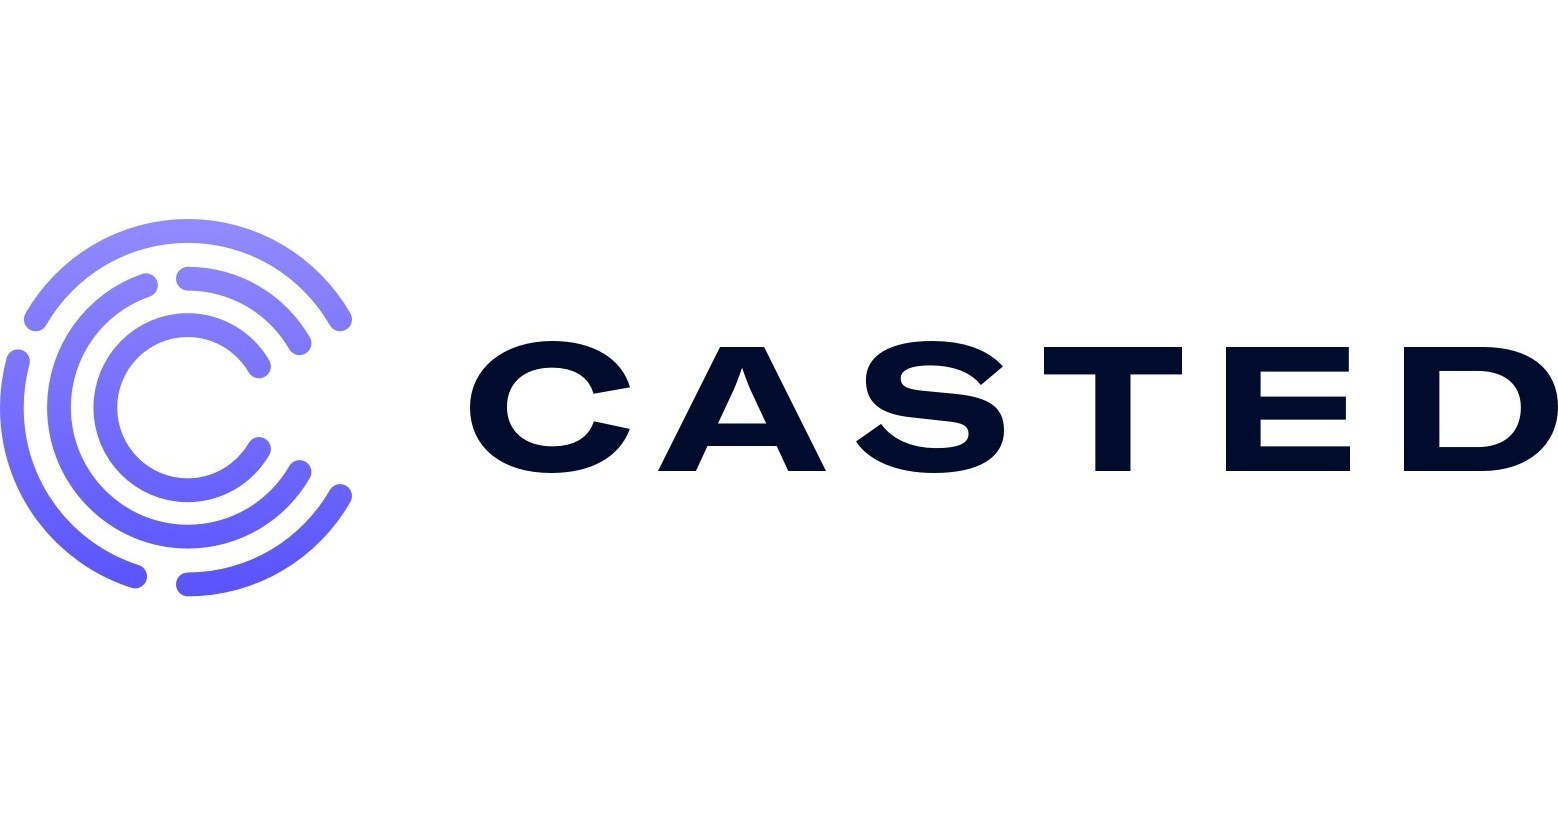 Casted Launches New Program to Democratize Access to Podcasting